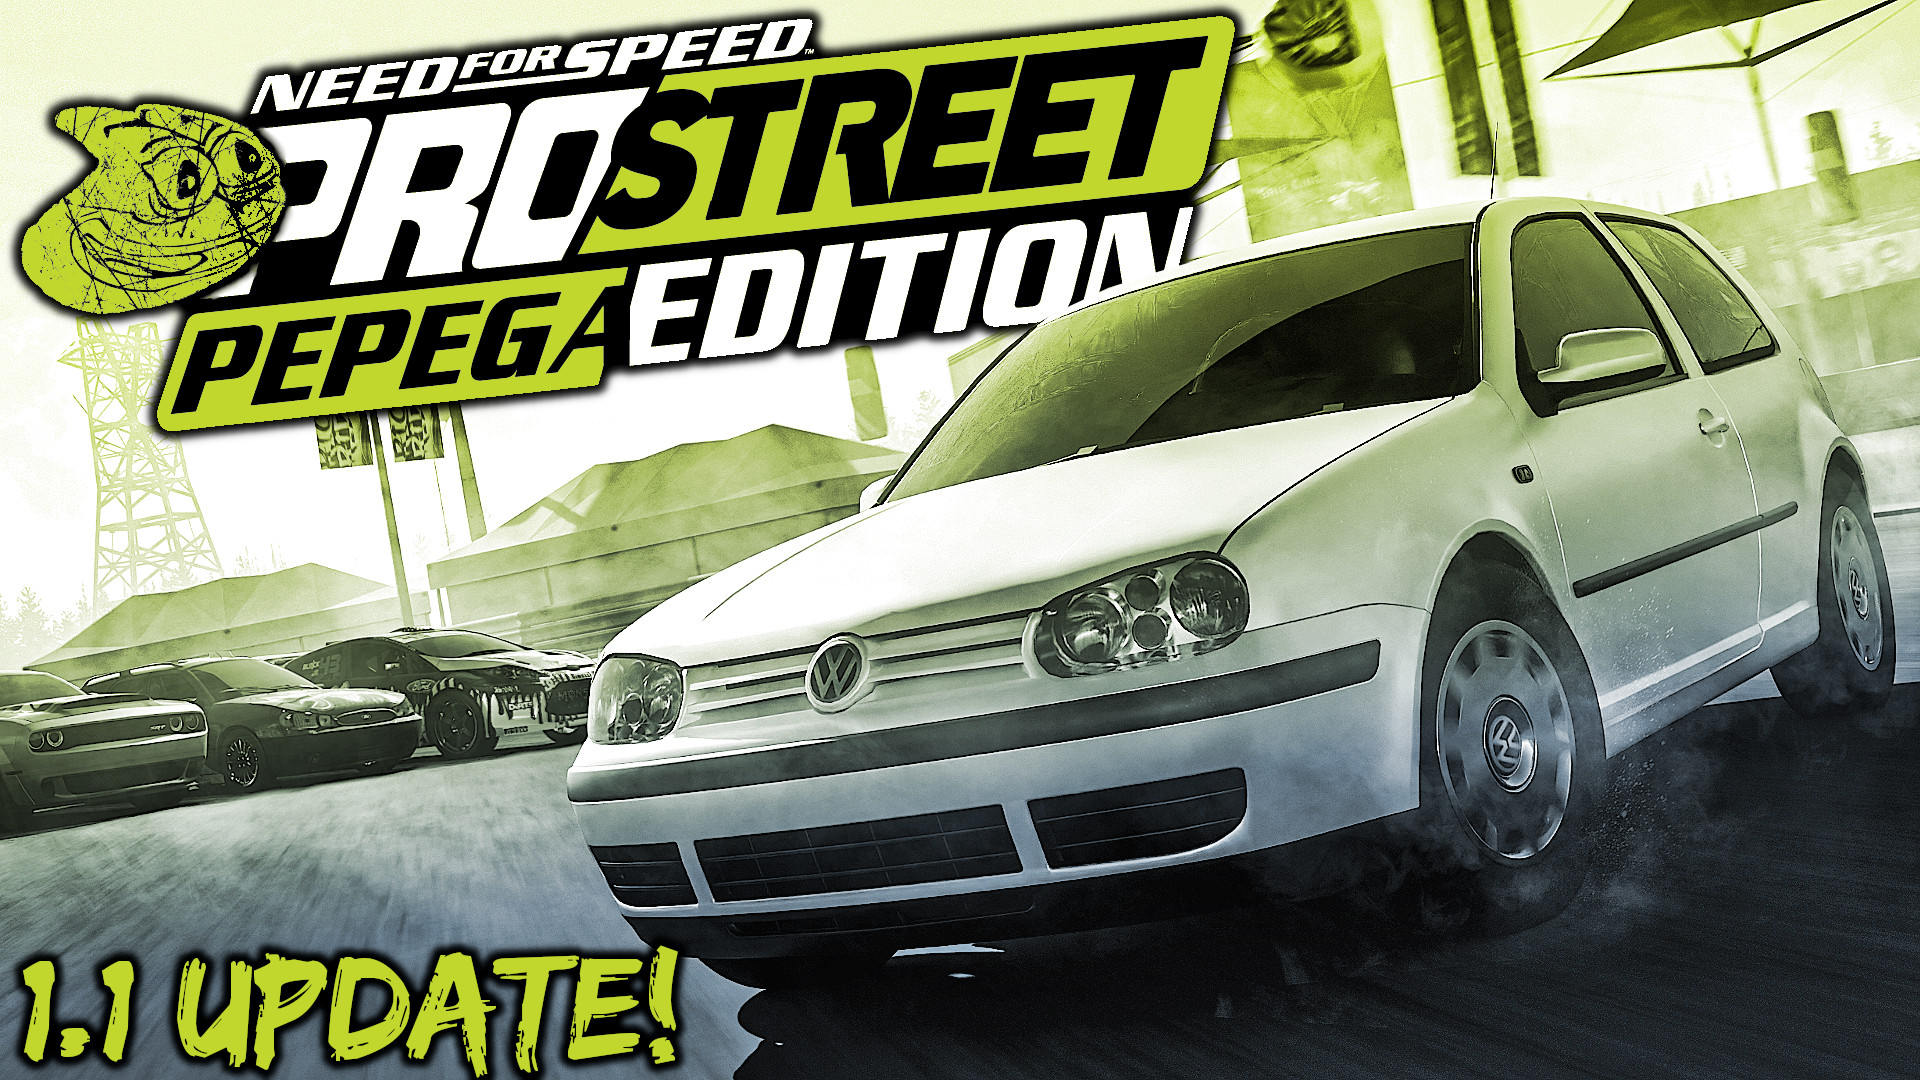 Need for Speed Most Wanted Pepega Edition - Pepega Specials 